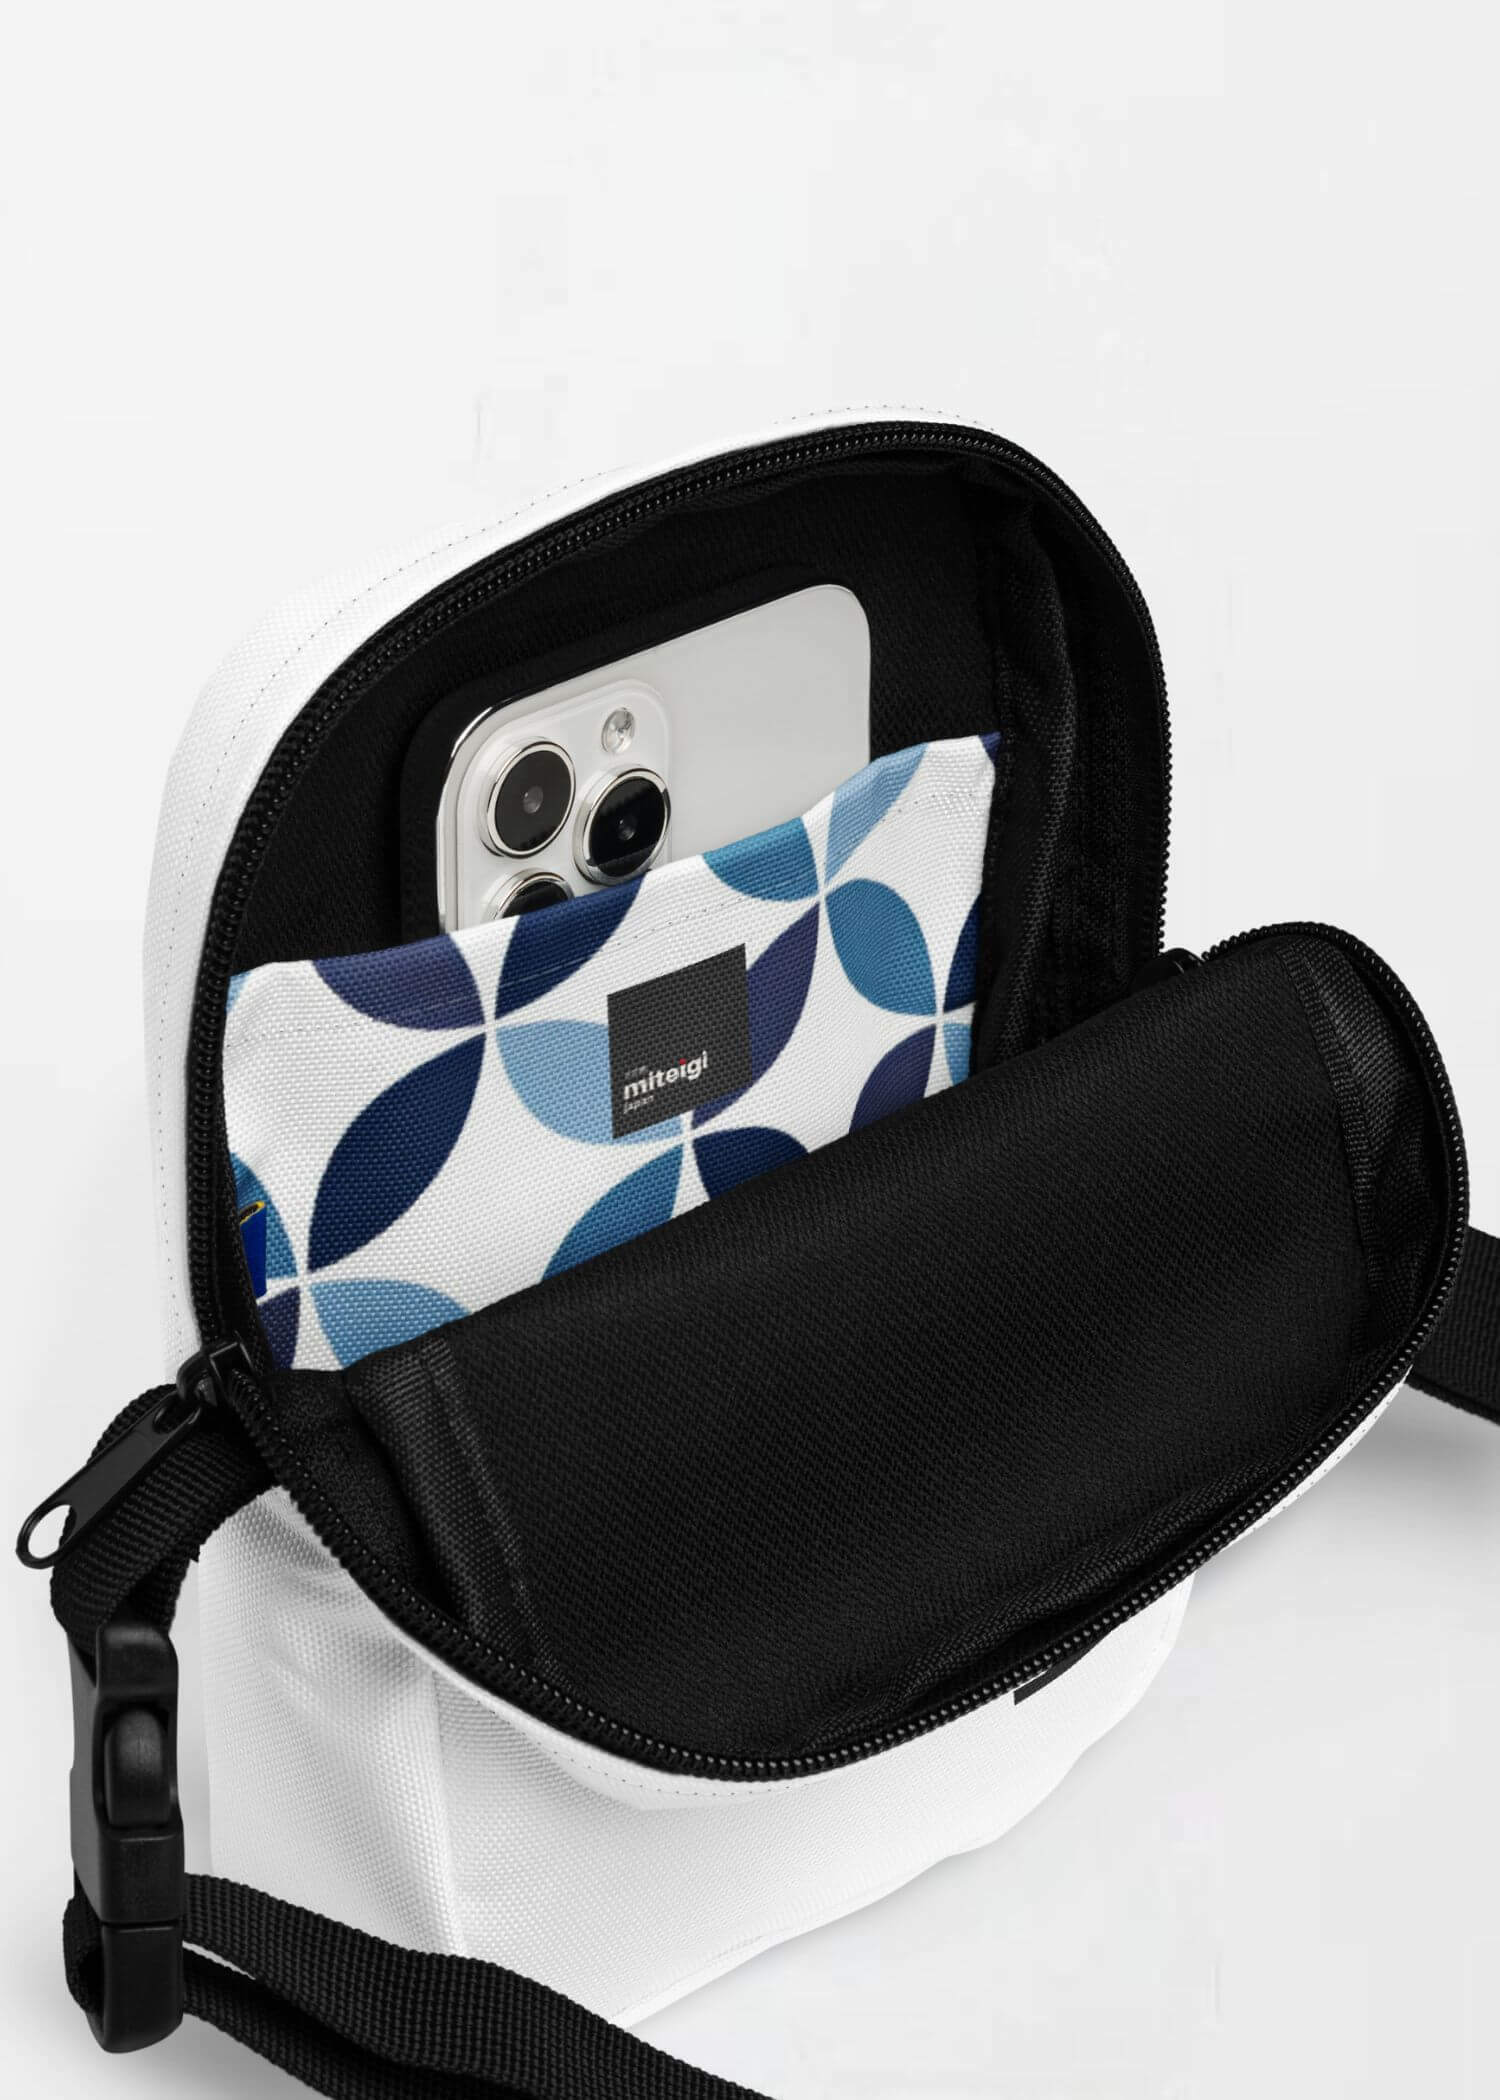 Utility Crossbody Bag miteigi Logo indigo   Unisex Men’s Women’s everyday use Japanese shoulder bags Luggage for man woman in white with black design and blue patchwork circles pattern highlights womens mens accessory